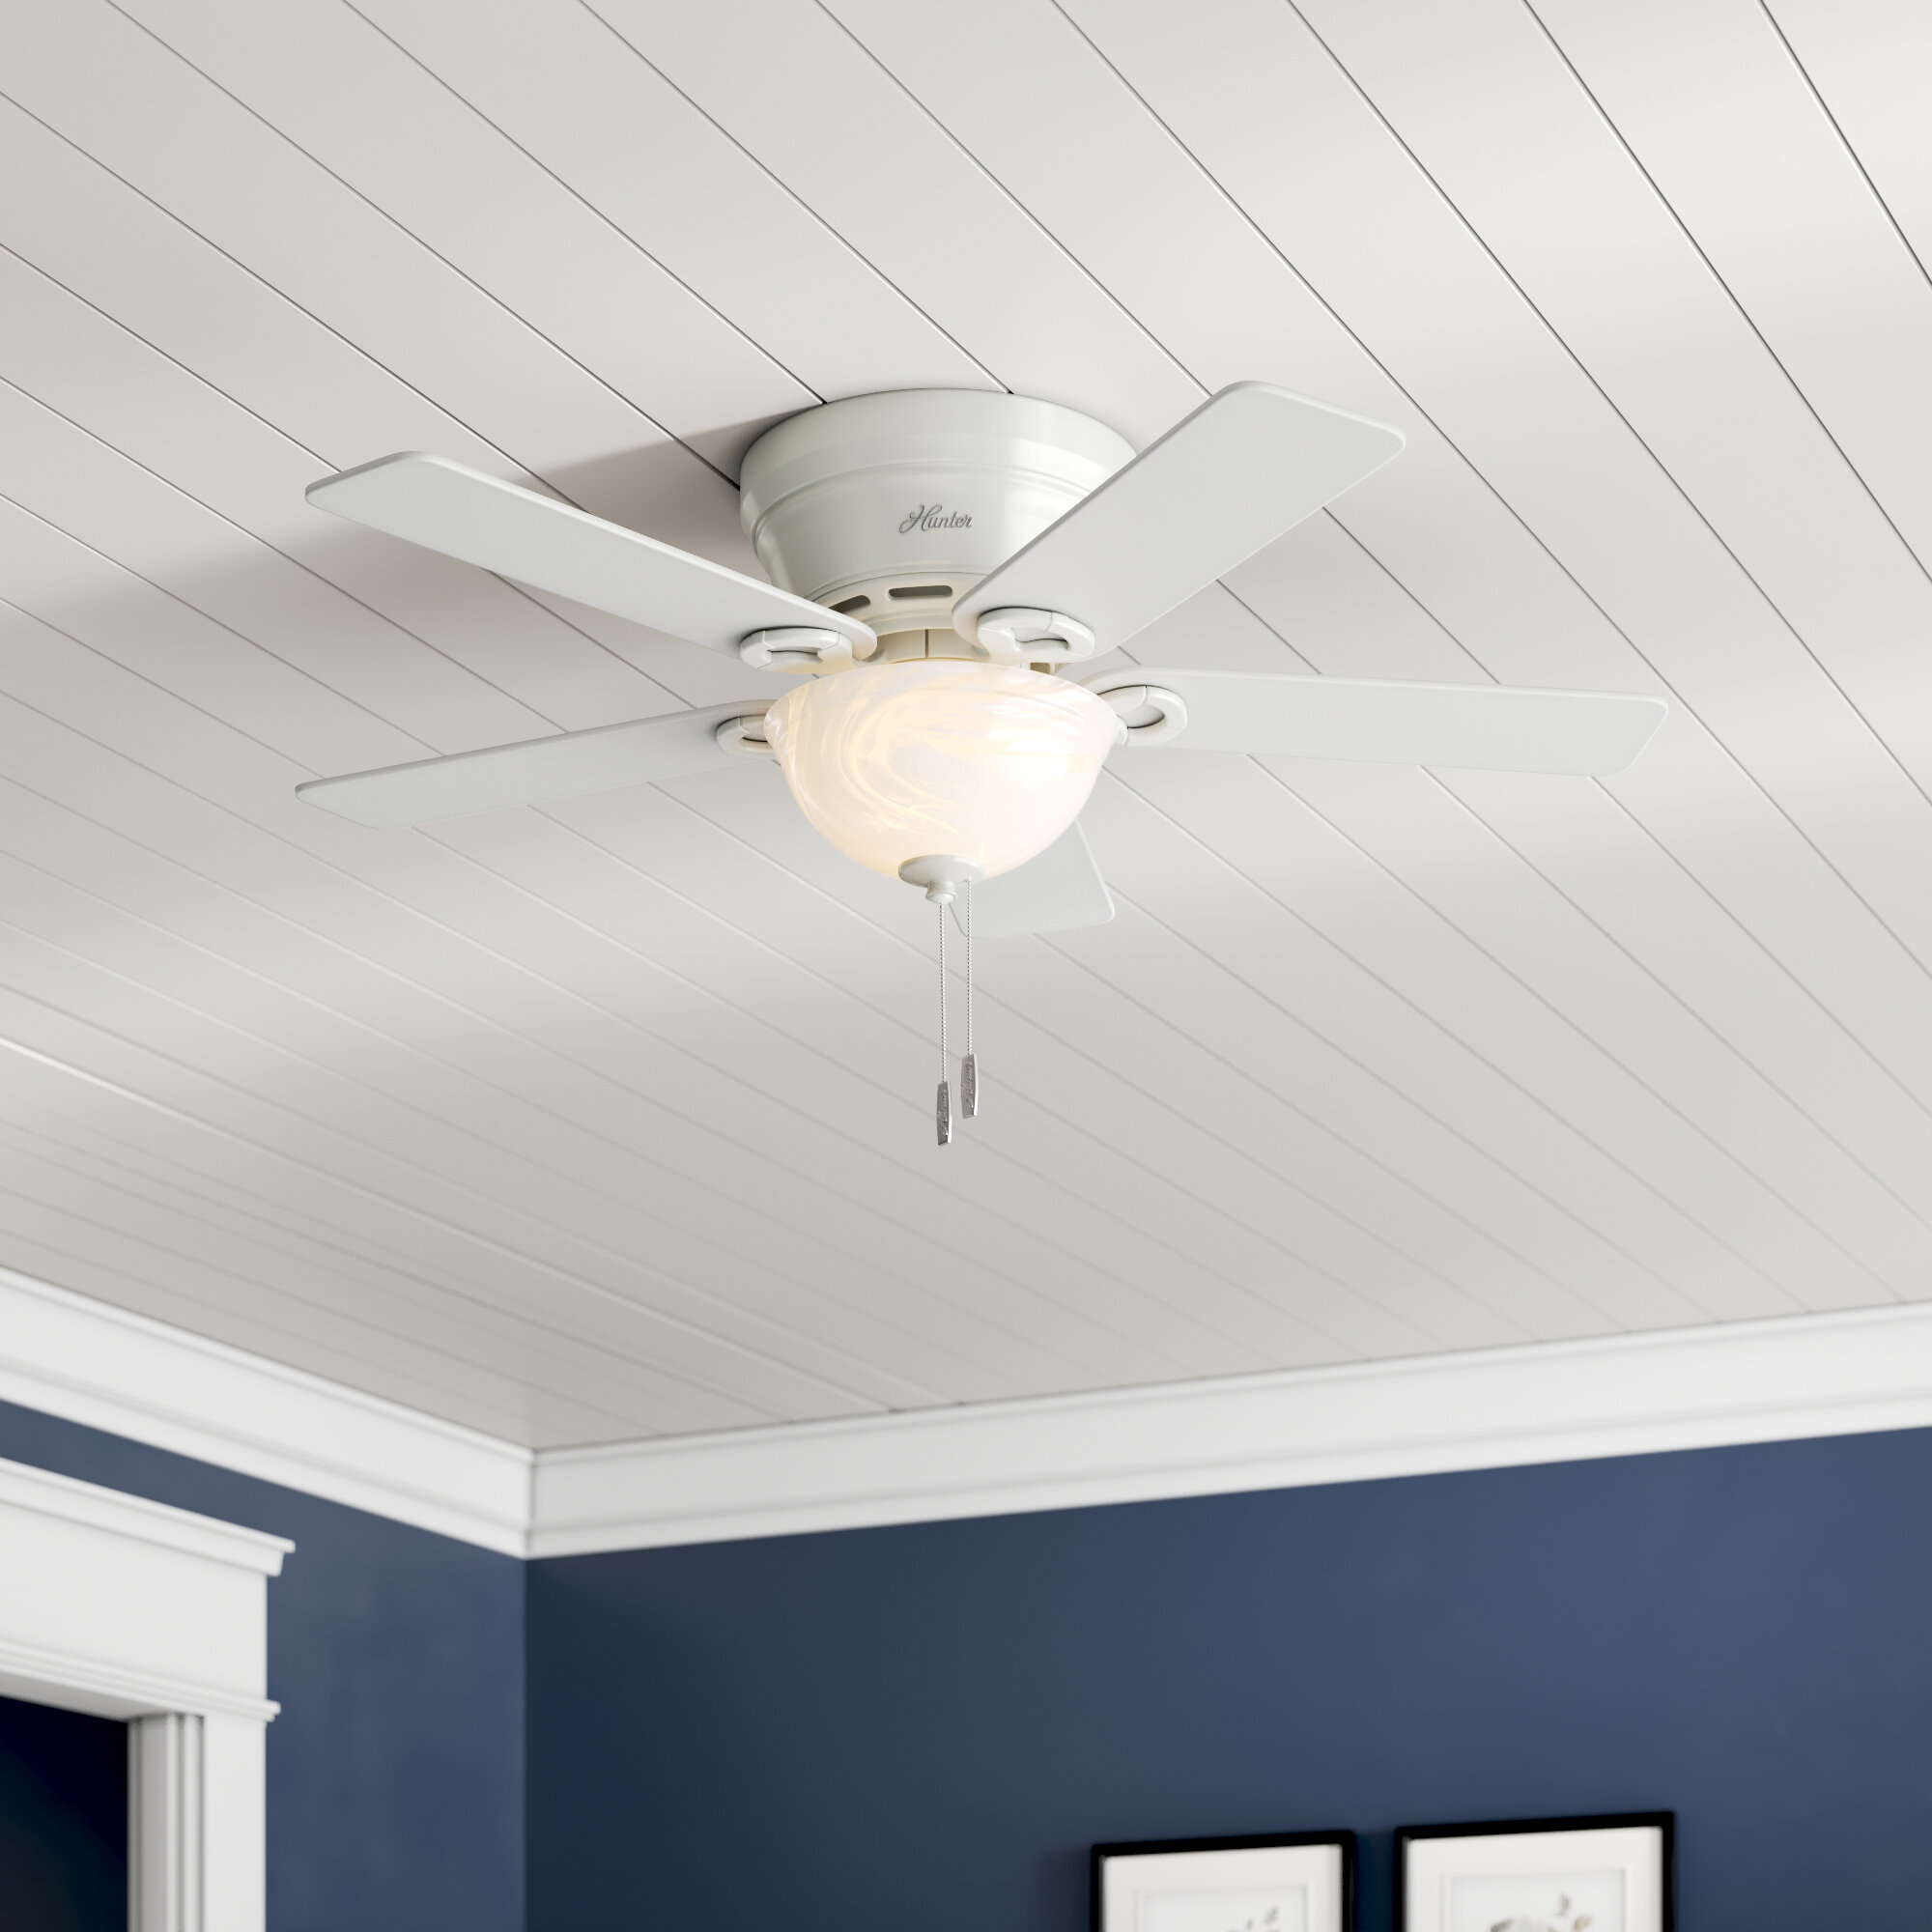 Hunter Fan 42 Haskell 5 Blade Standard Ceiling Fan With Pull Chain And Light Kit Included Reviews Wayfair